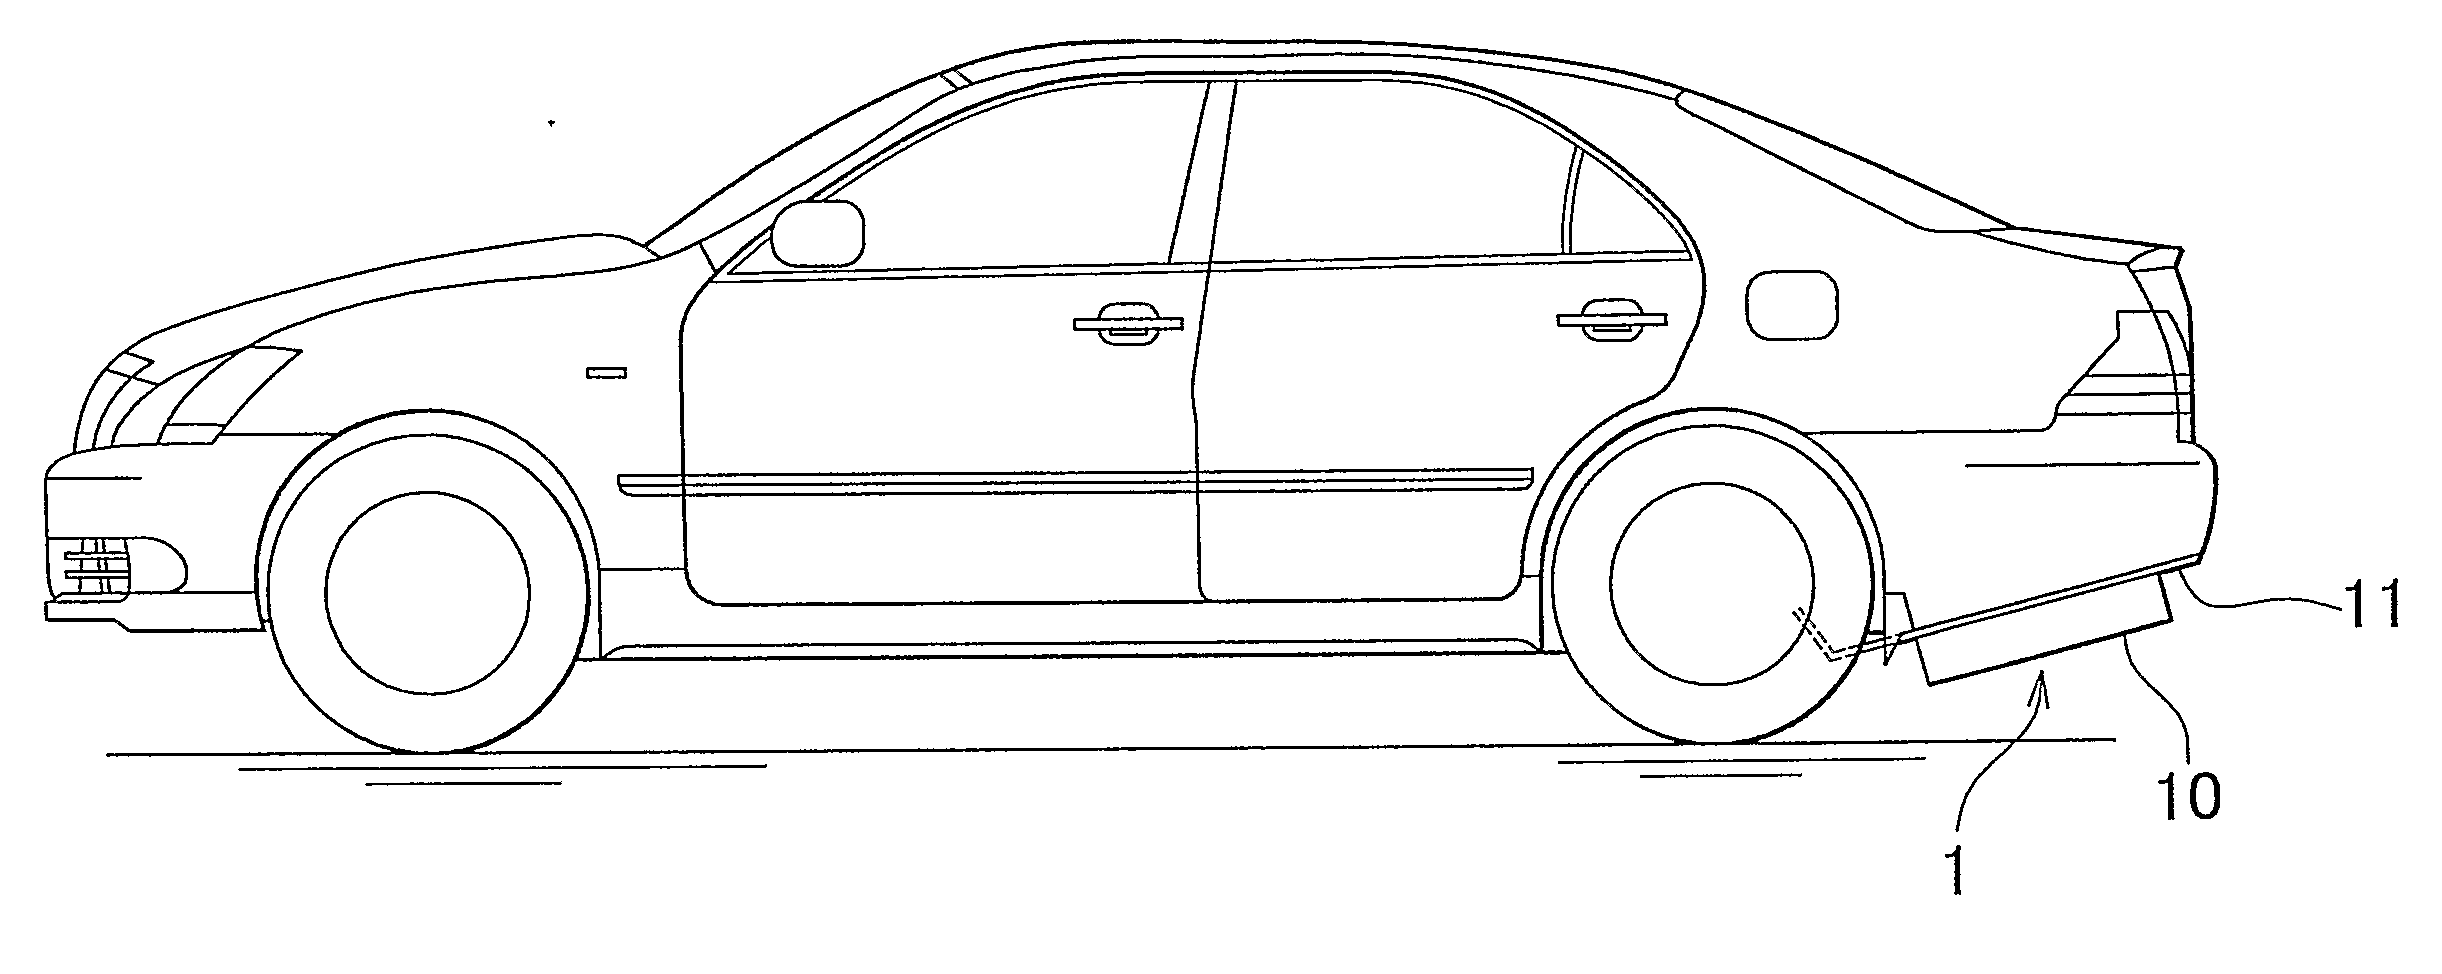 Vehicle and vehicle substructure